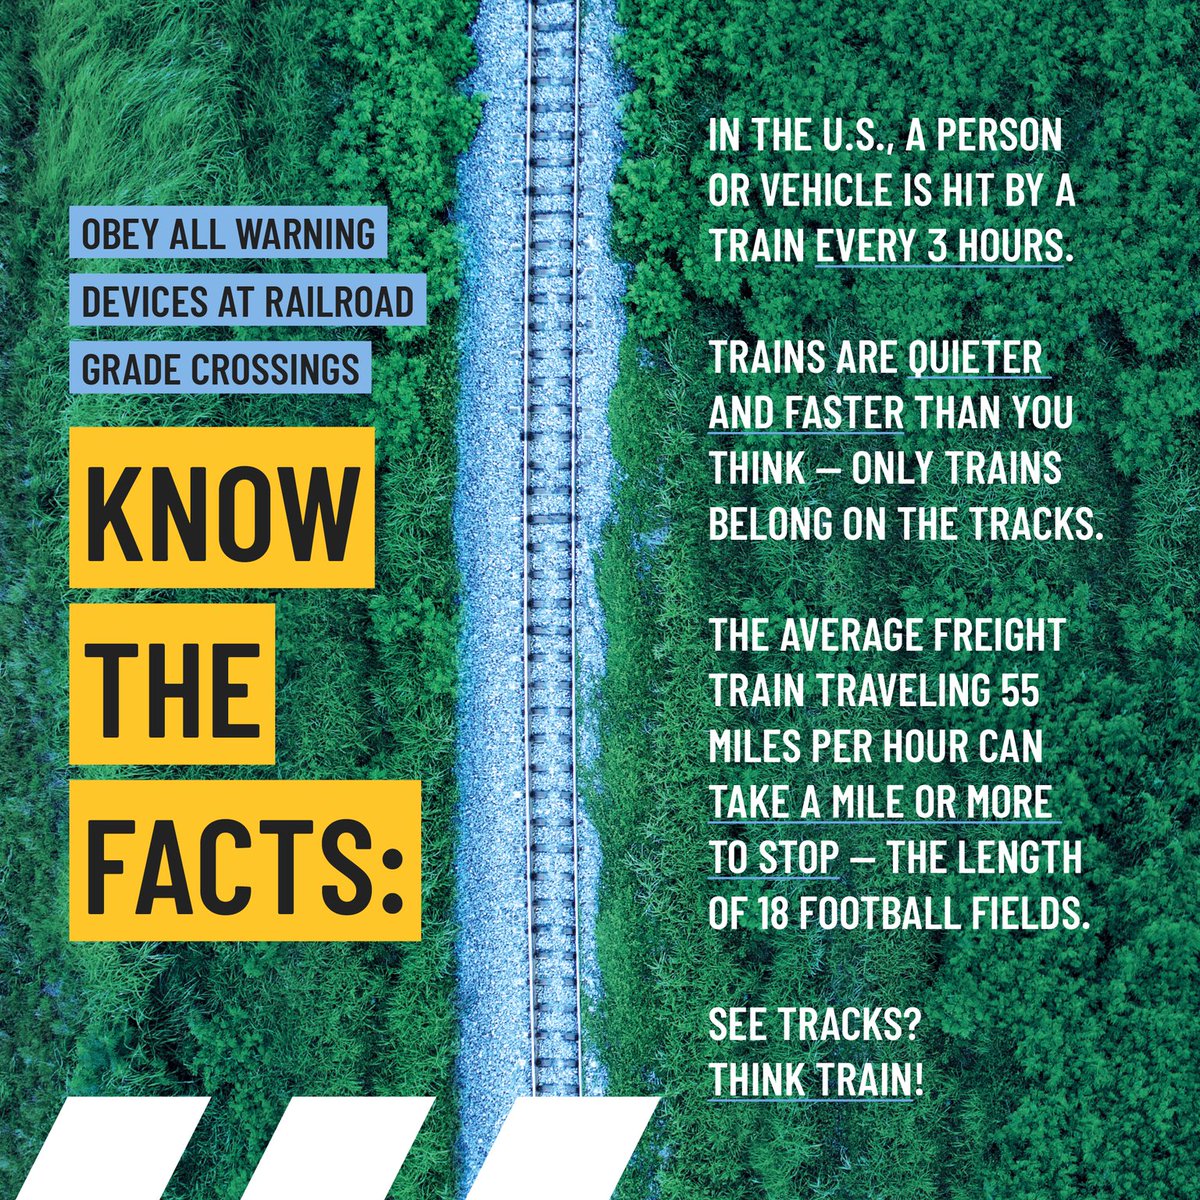 KNOW THE FACTS: Obey all warning devices at railroad grade crossings. Find #RailSafetyEducation resources and more at oli.org #STOPTrackTragedies #SeeTracksThinkTrain